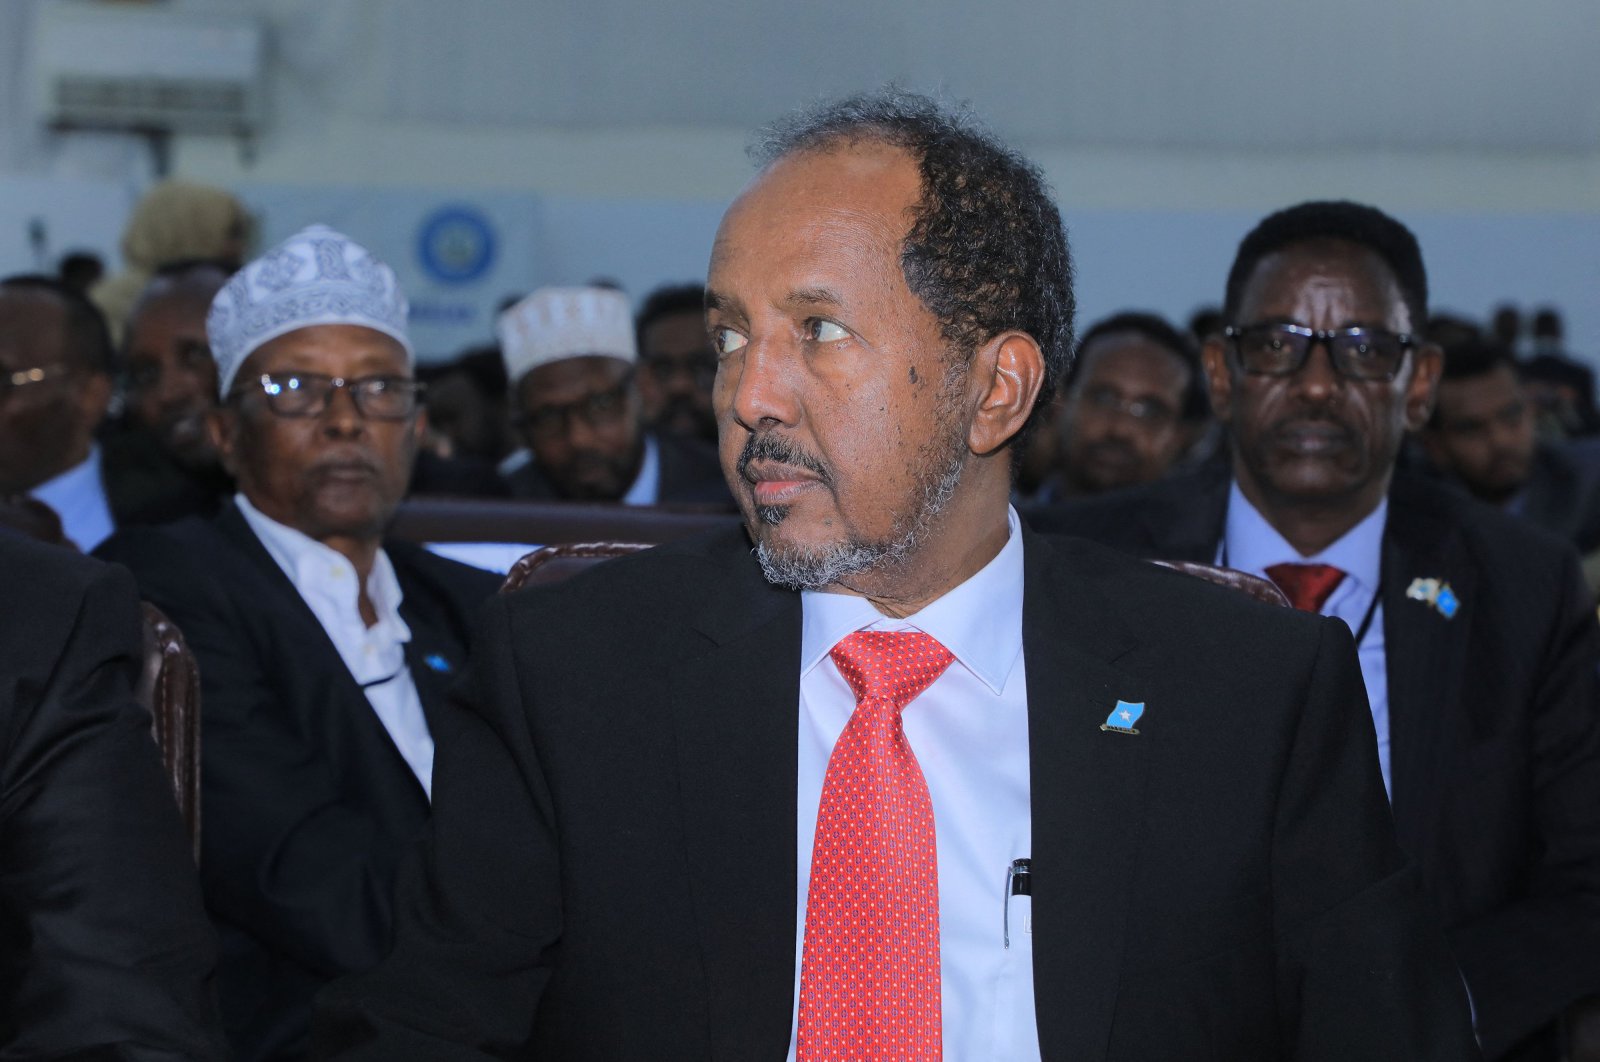 Newly elected Somalia President Hassan Sheikh Mohamud looks on after he was sworn-in, in the capital Mogadishu, Somalia, May 15, 2022. (AFP Photo)